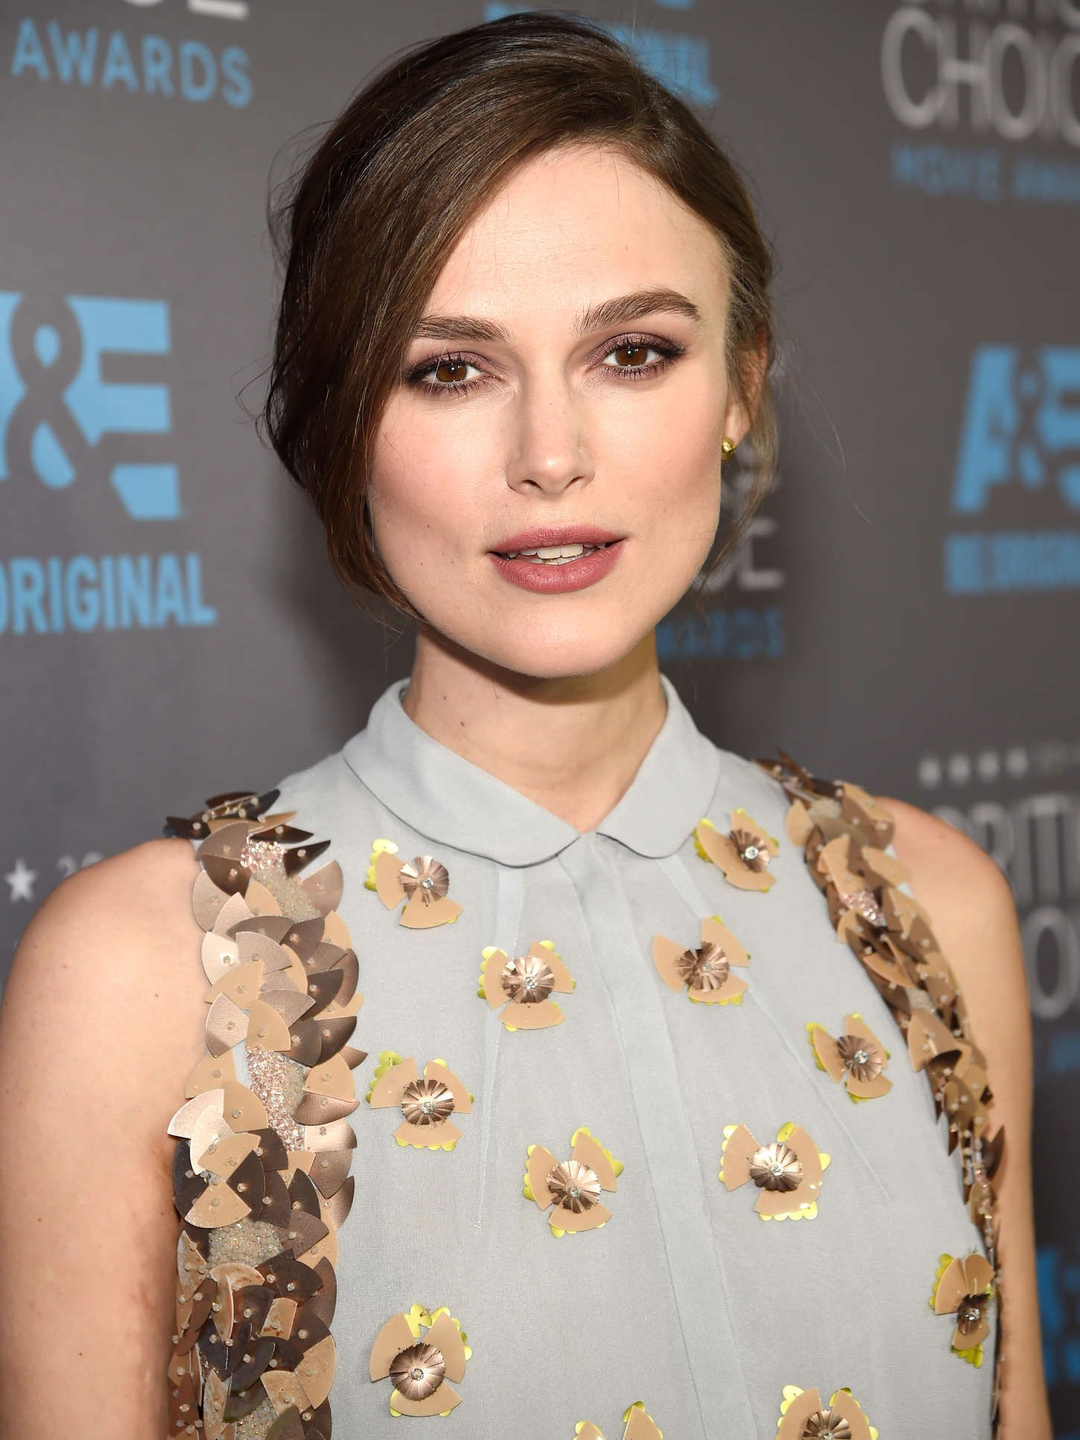 Keira Knightley who is her father